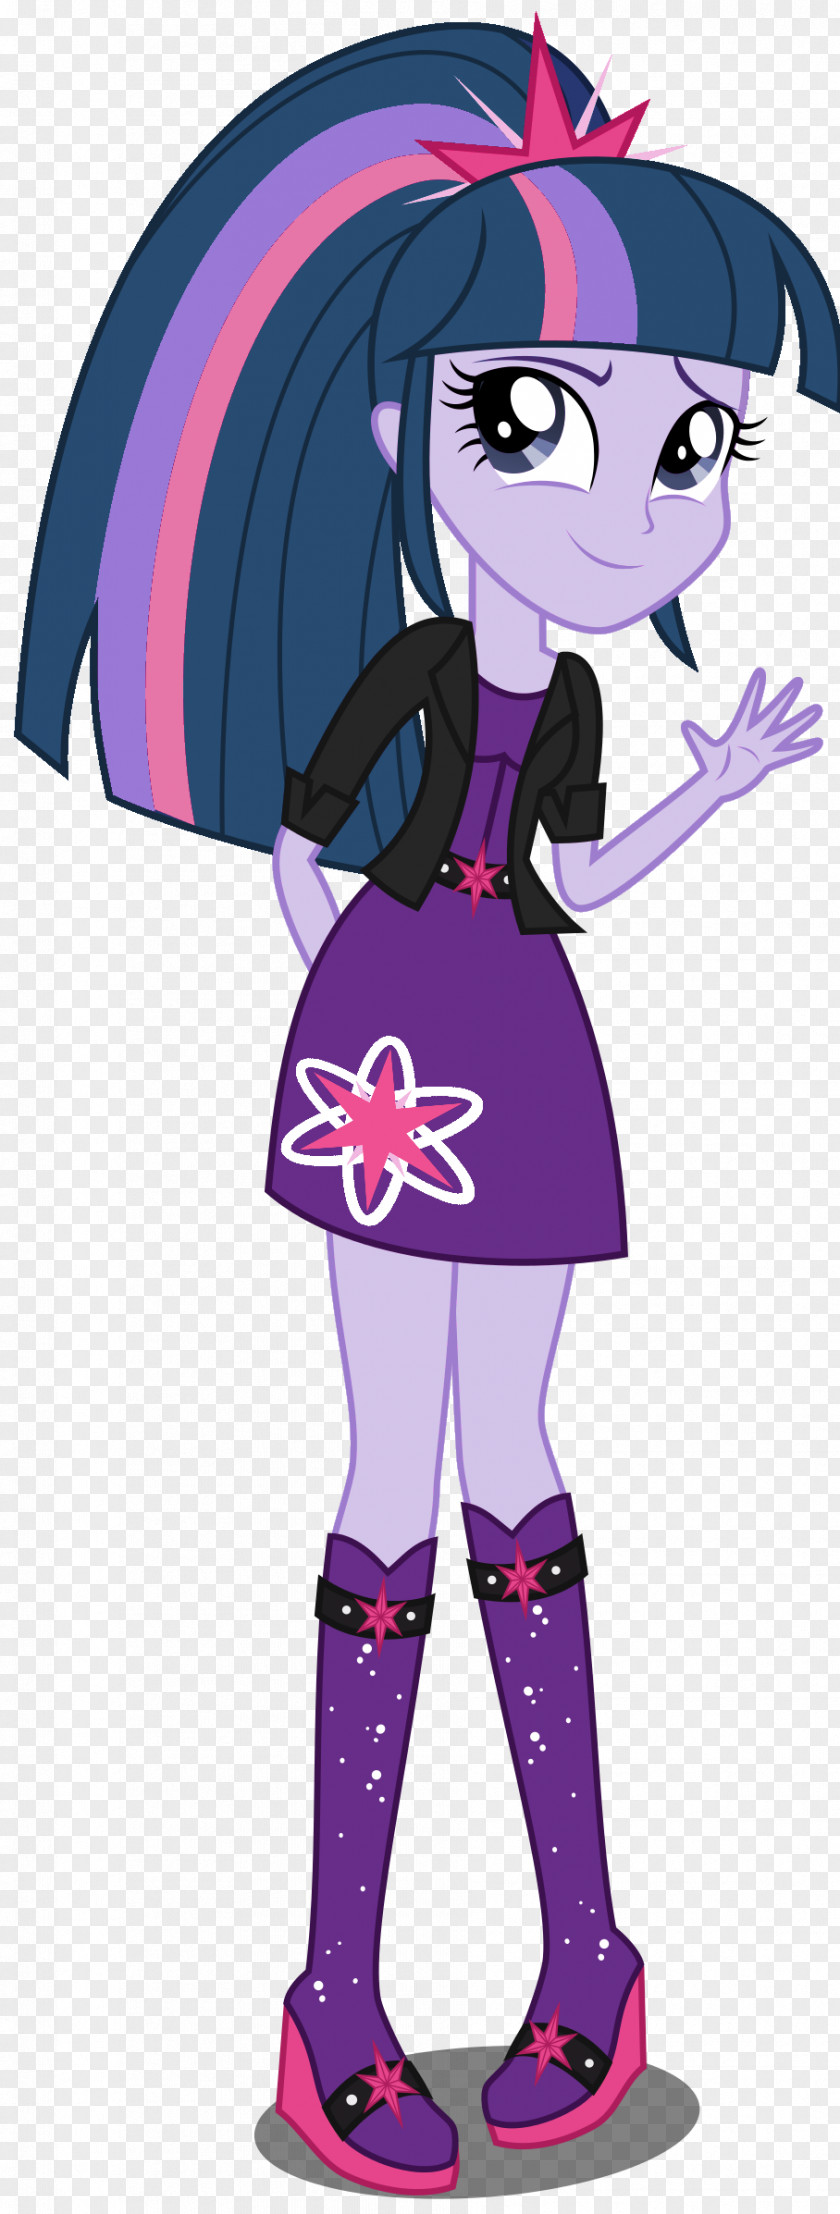 Colouring Pictures Of Unicorns Twilight Sparkle Sunset Shimmer My Little Pony: Equestria Girls PNG